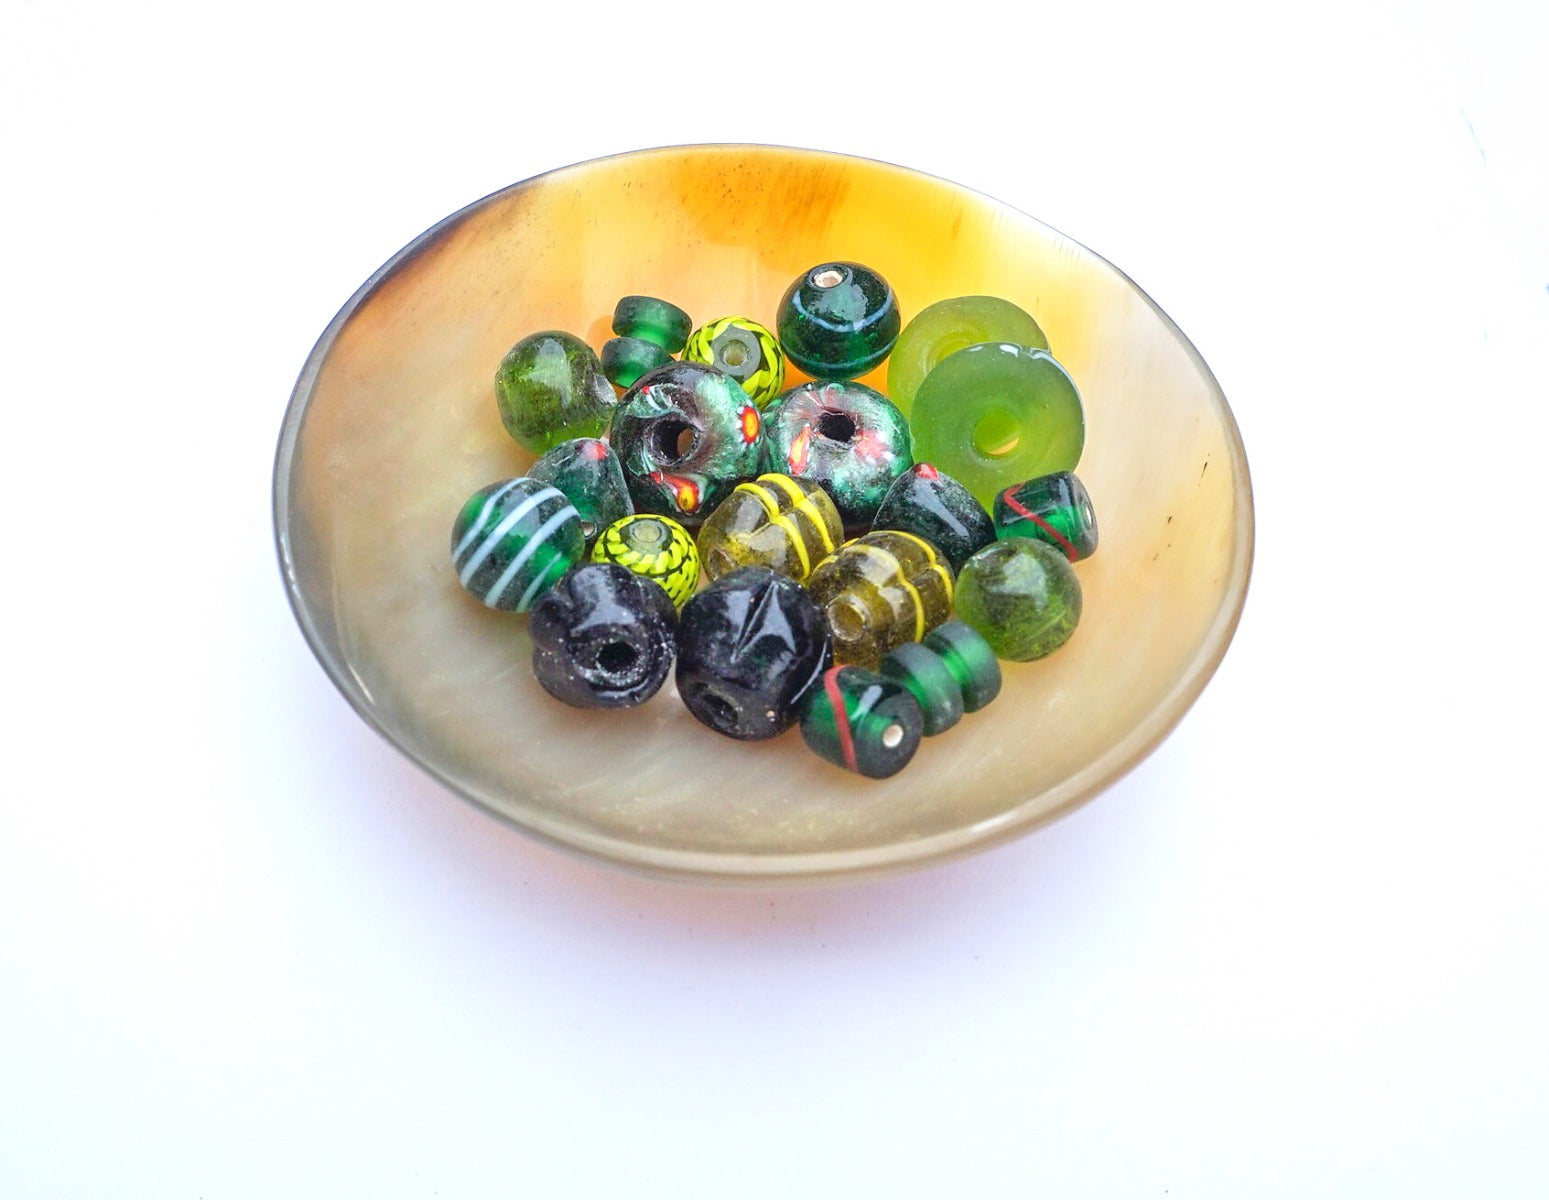 Mixture of green historical glass beads